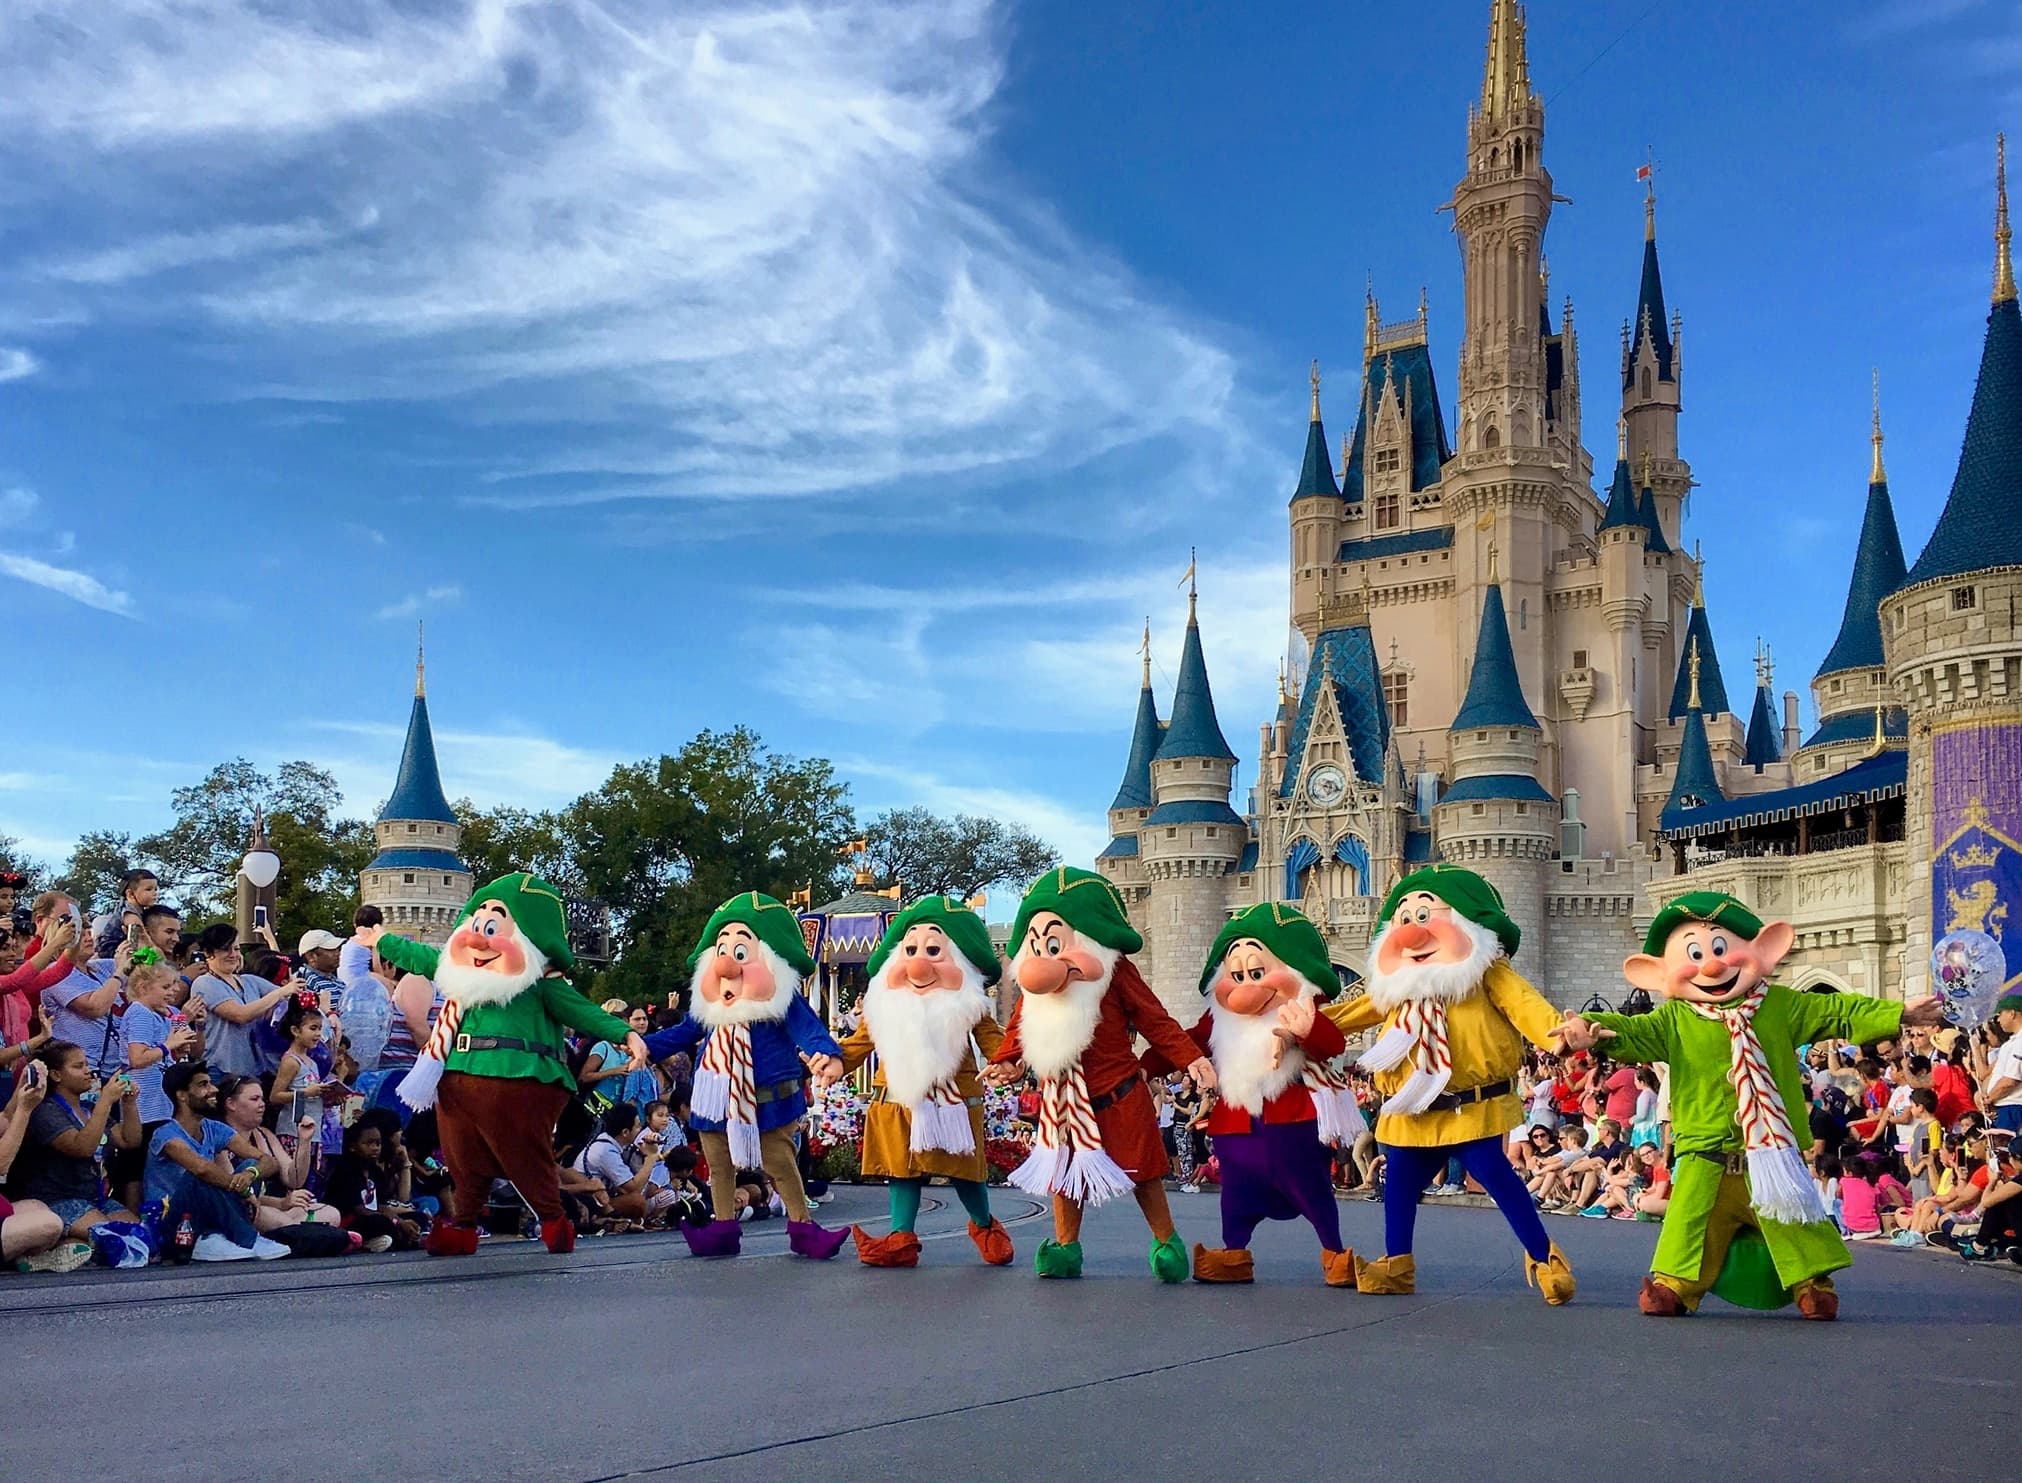 Seven Dwarfs perform with castle in background